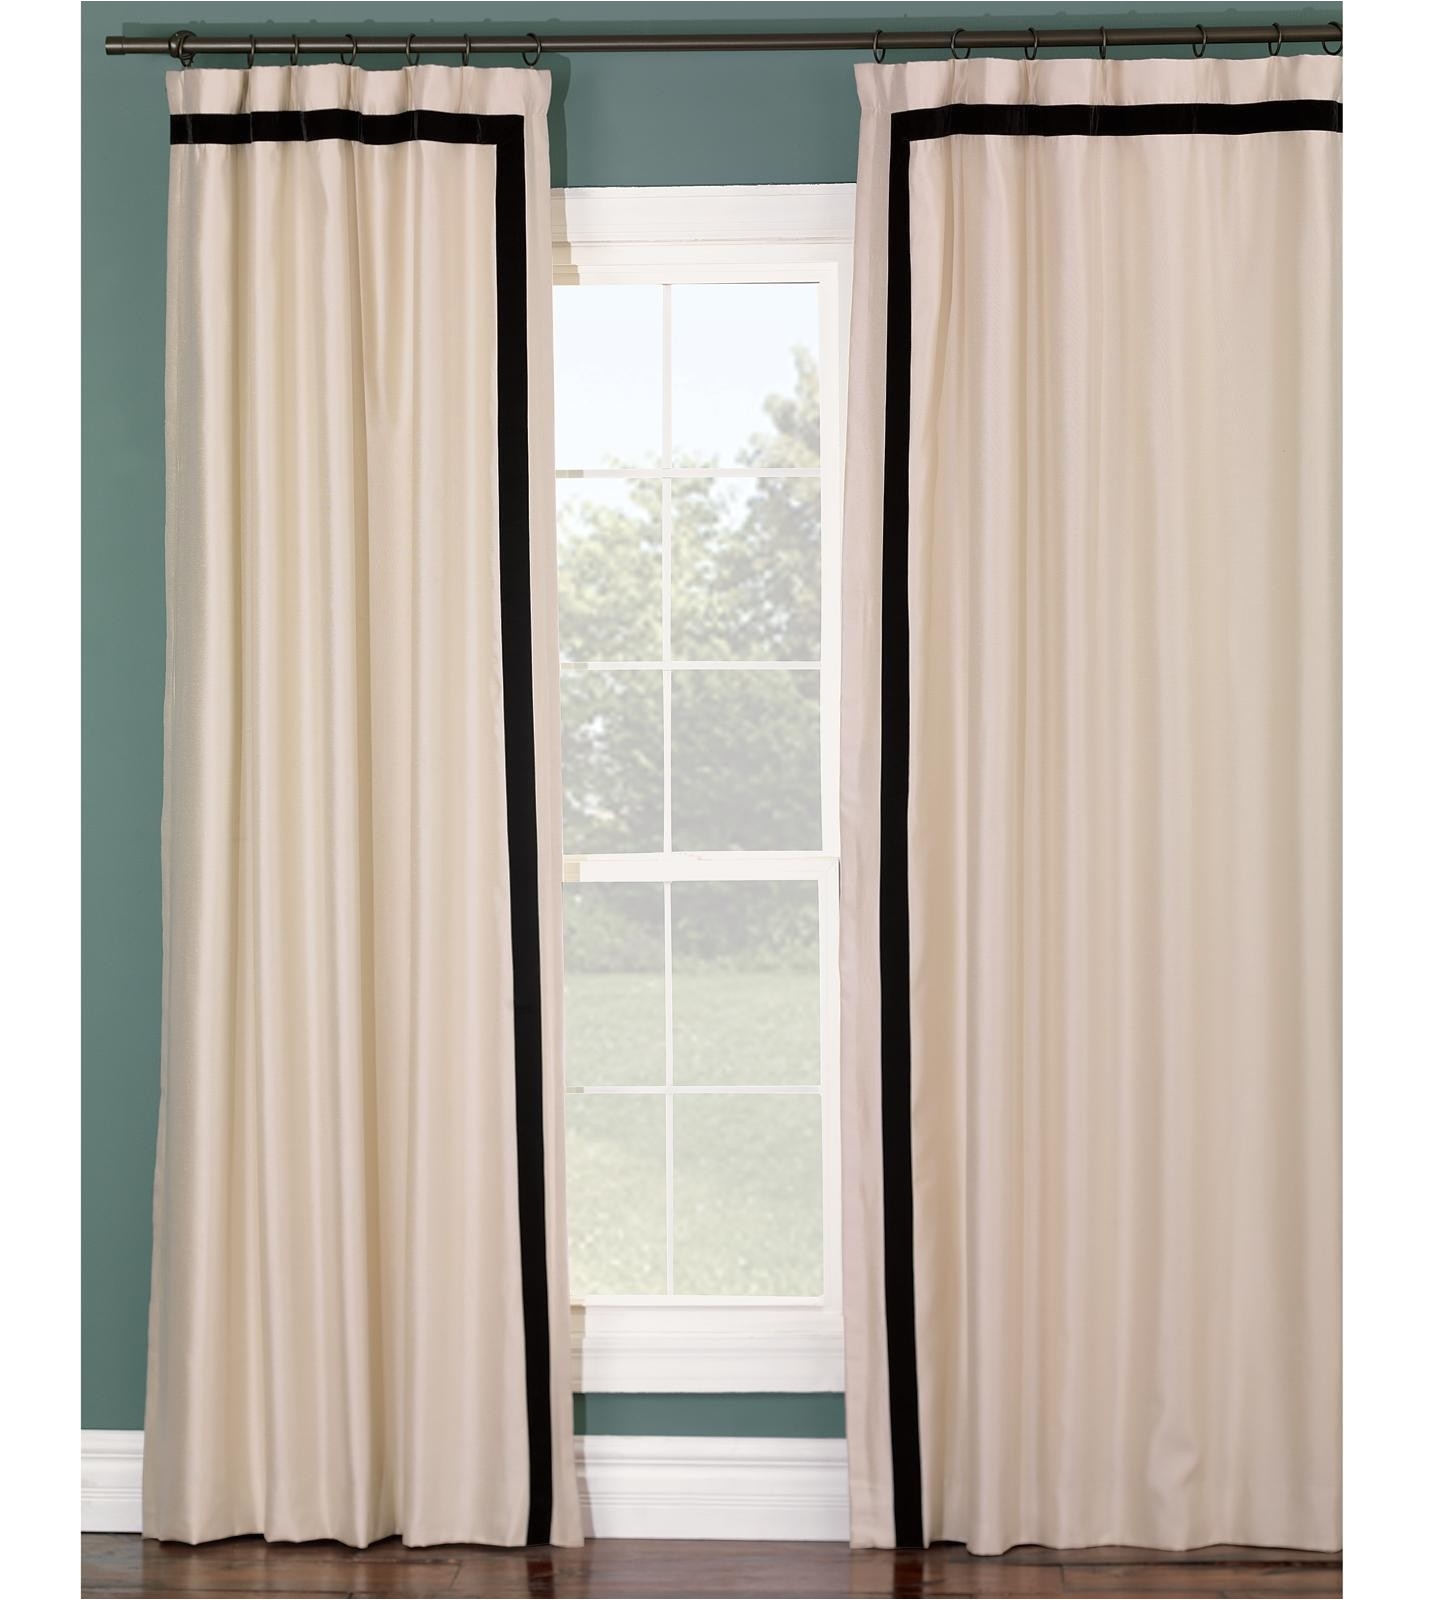 Living Room Curtains Design Appealing Red Drapes Living Room Valid Furniture Curtain Designs